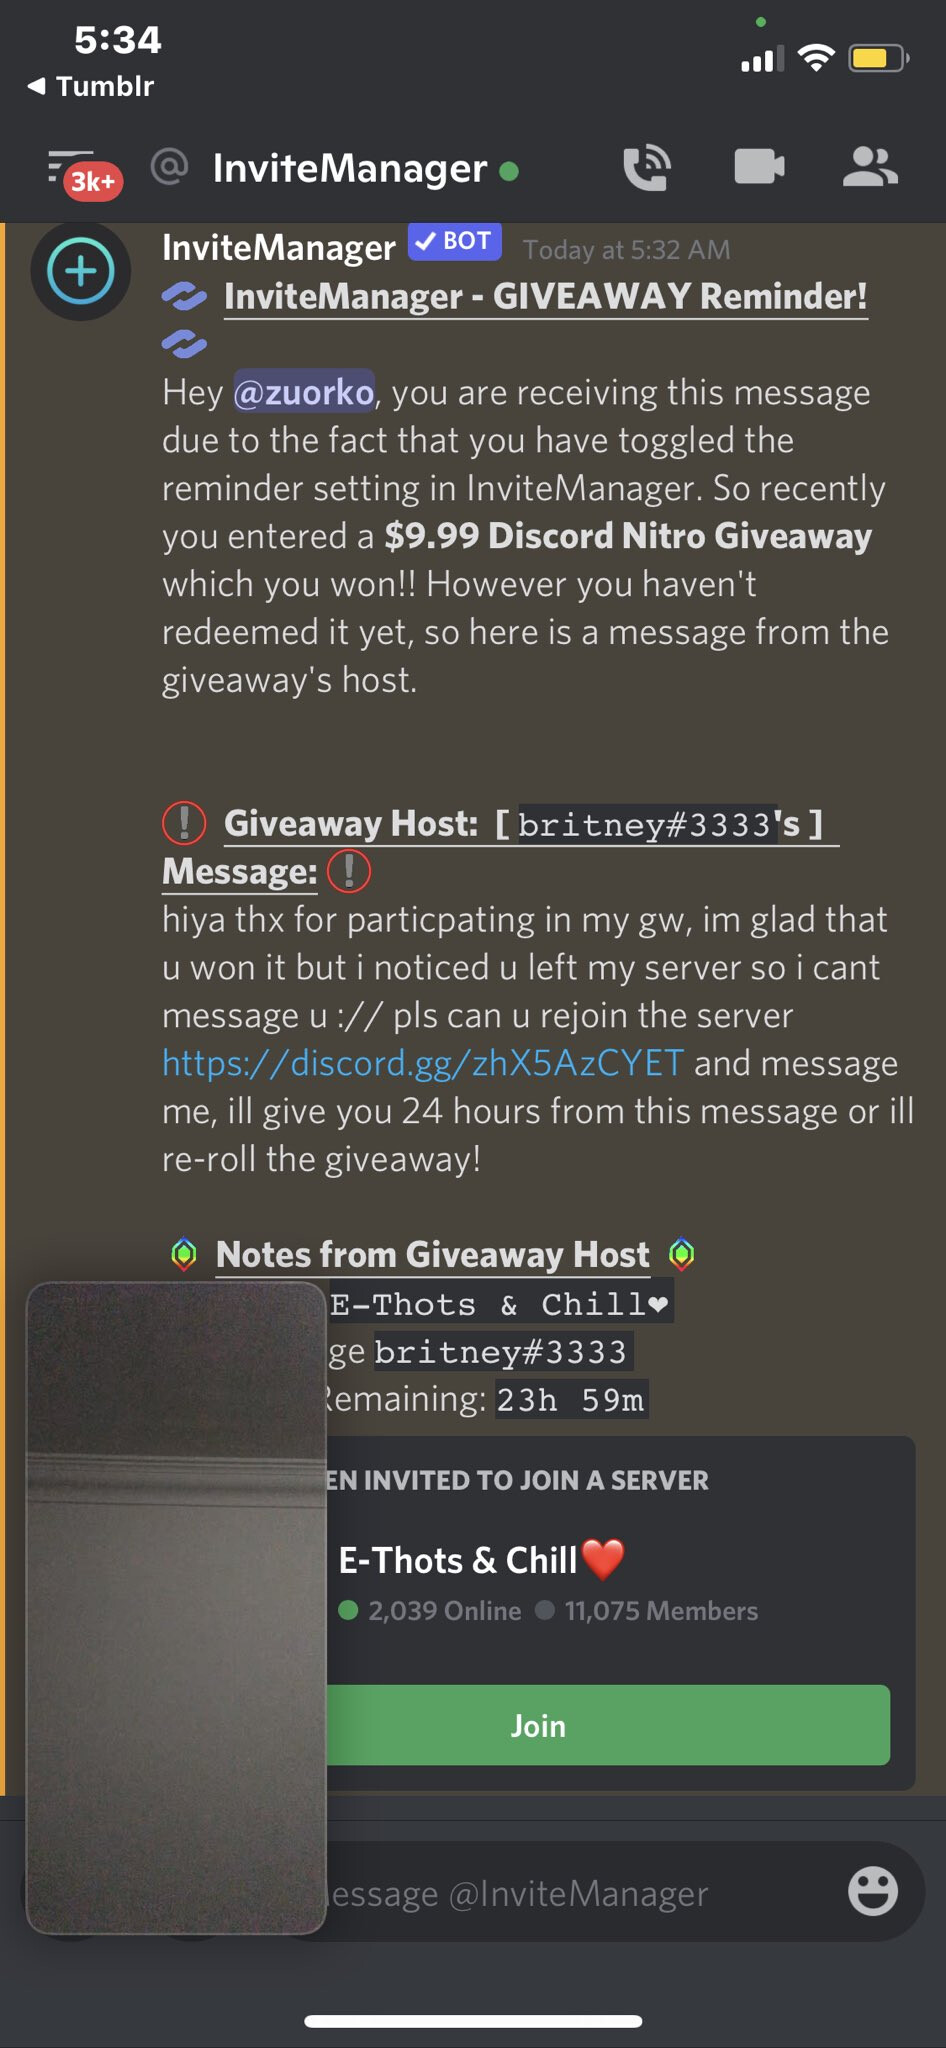 Discord bot giveaway, is this a scam? : r/Scams